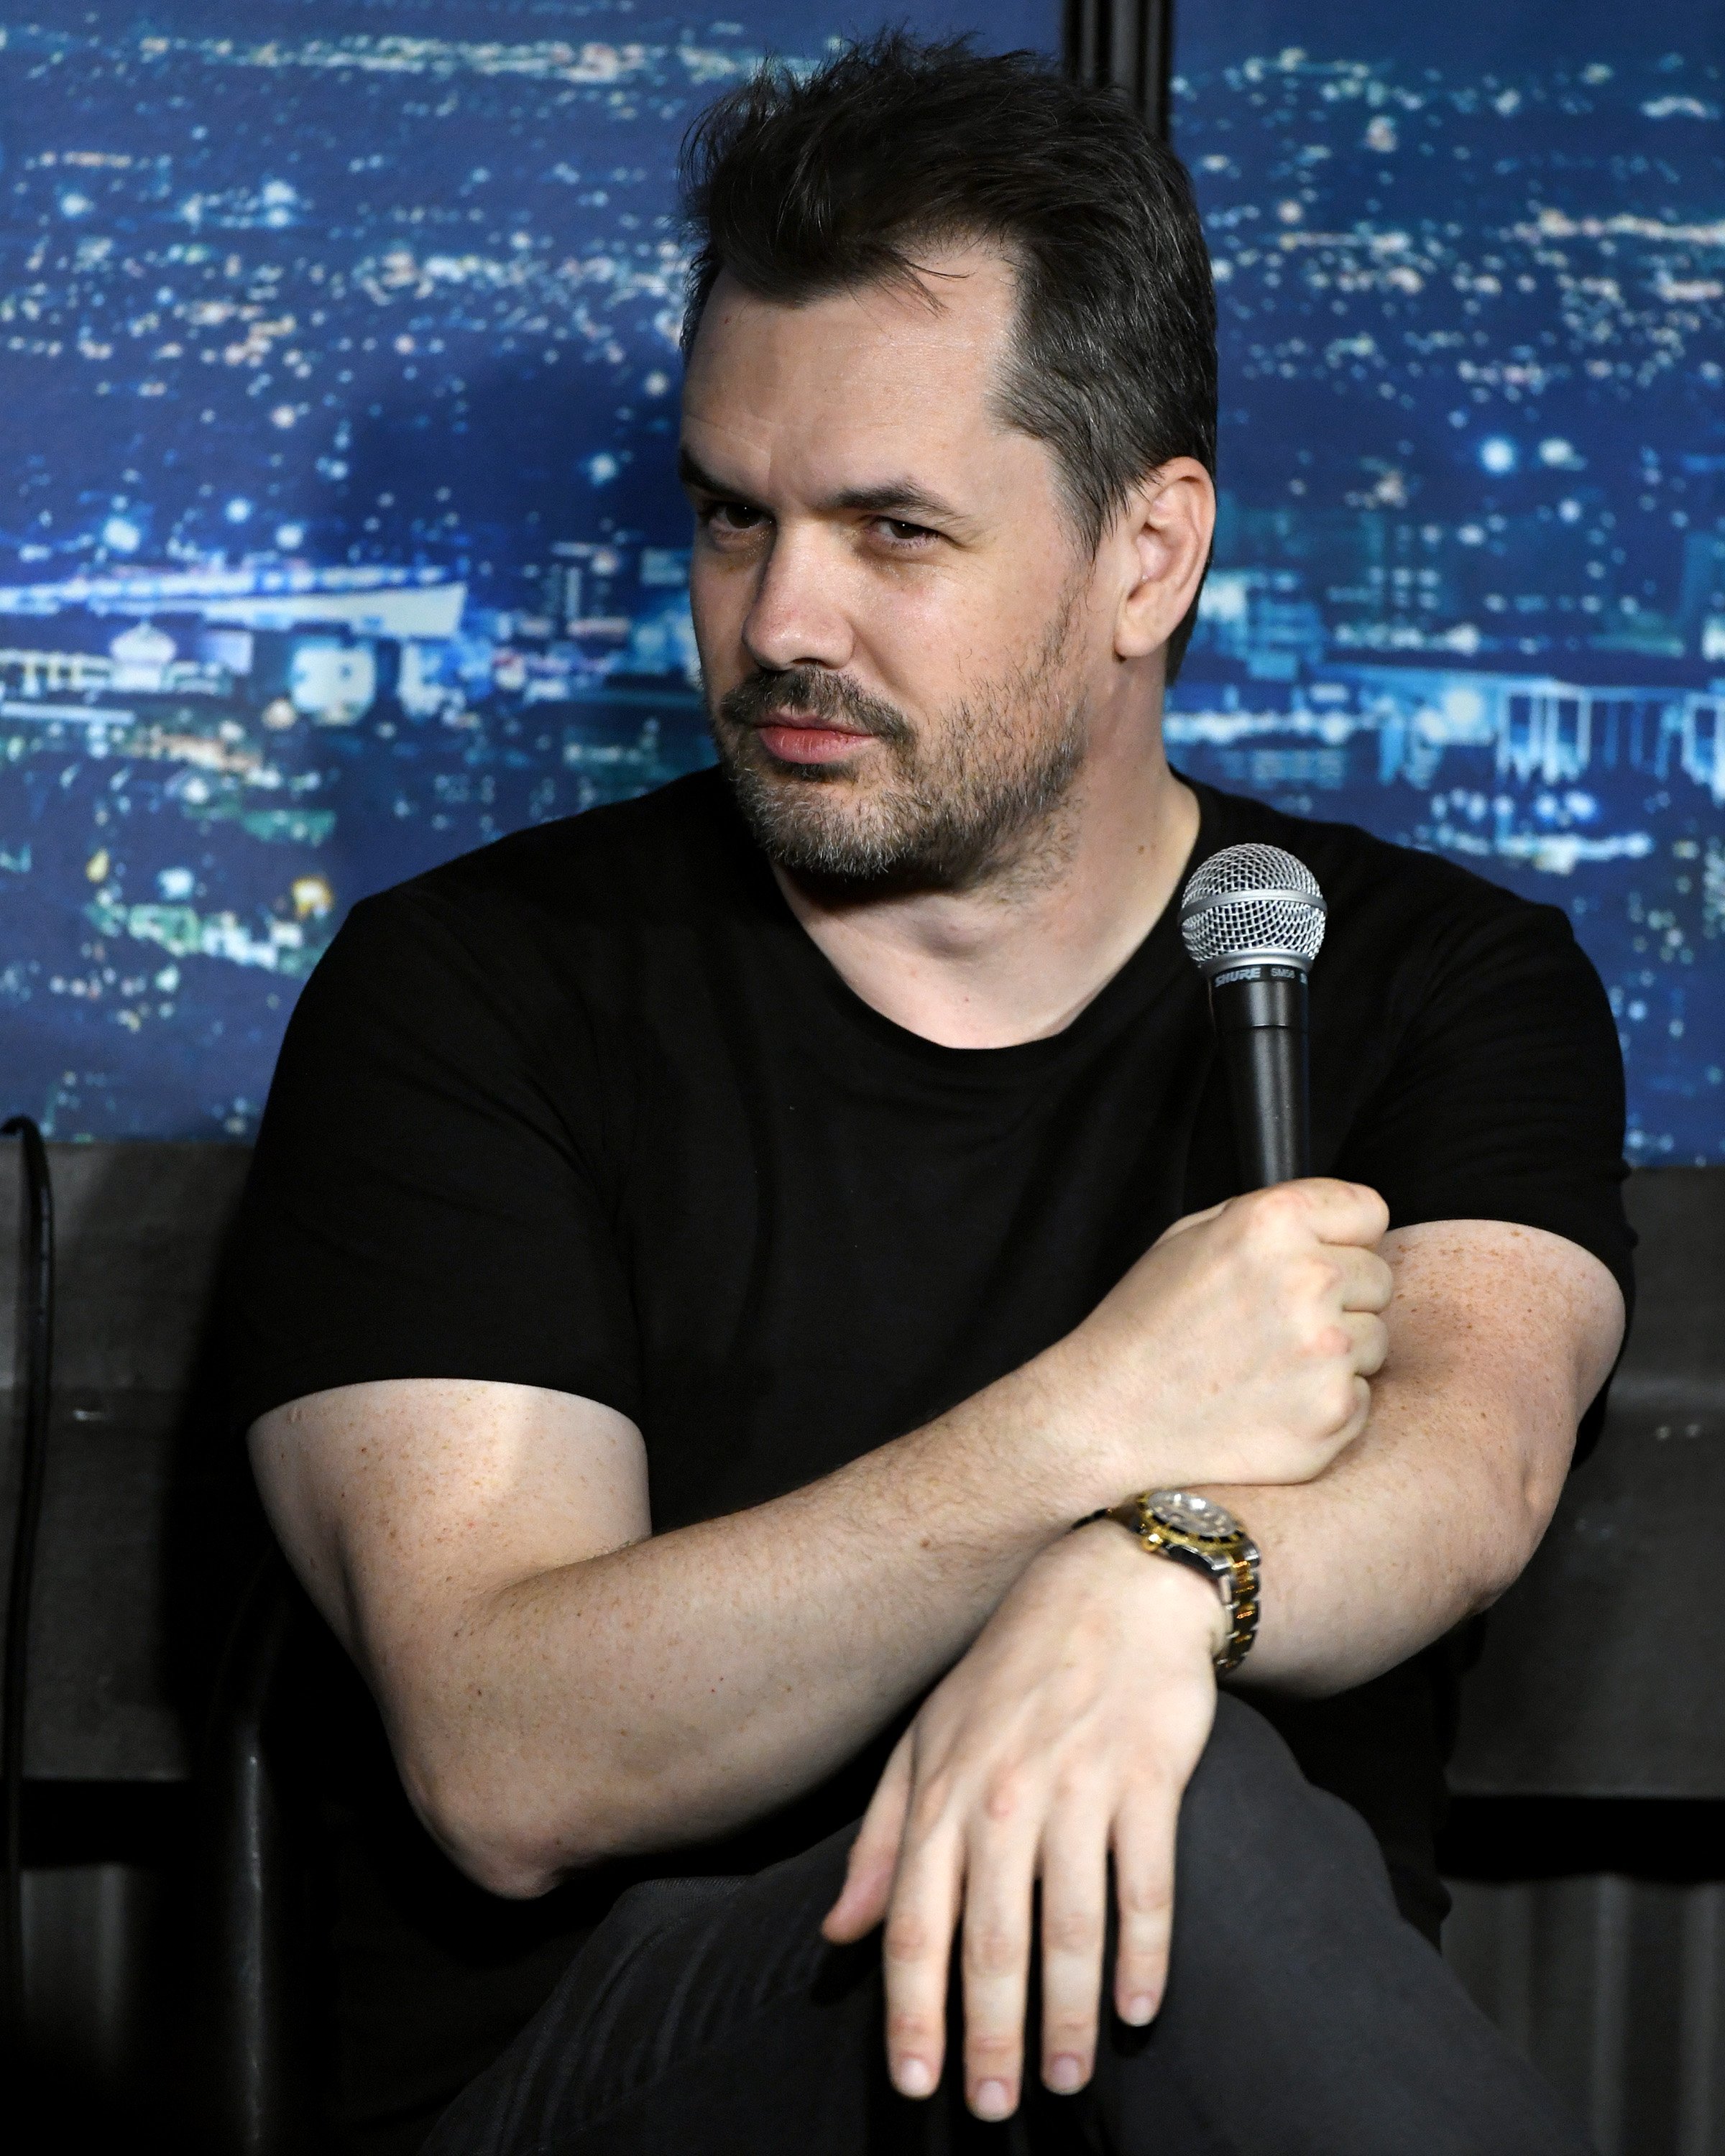 Jim Jeffries is pictured as he performs during his appearance at The Ice House Comedy Club on January 9, 2020, in Pasadena, California | Source: Getty Images